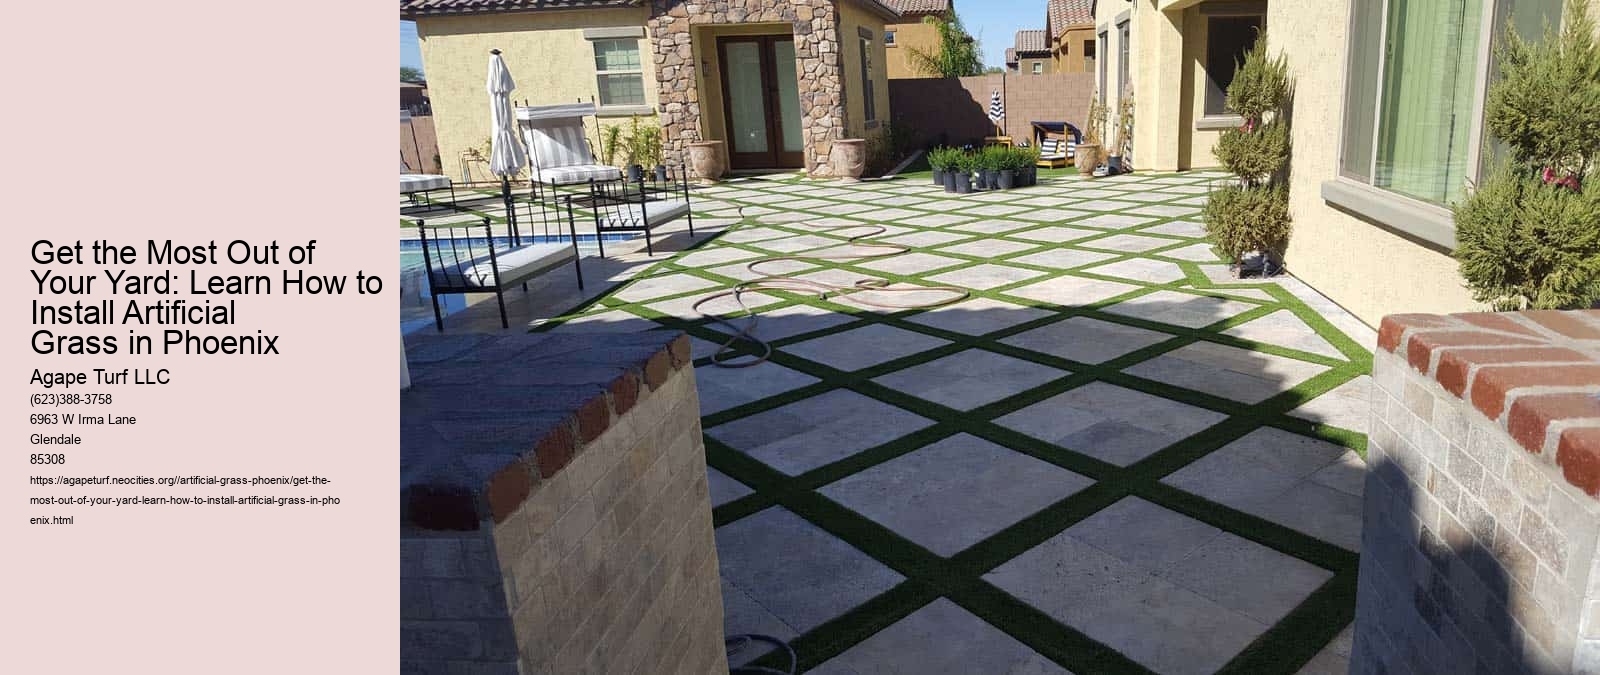 Get the Most Out of Your Yard: Learn How to Install Artificial Grass in Phoenix